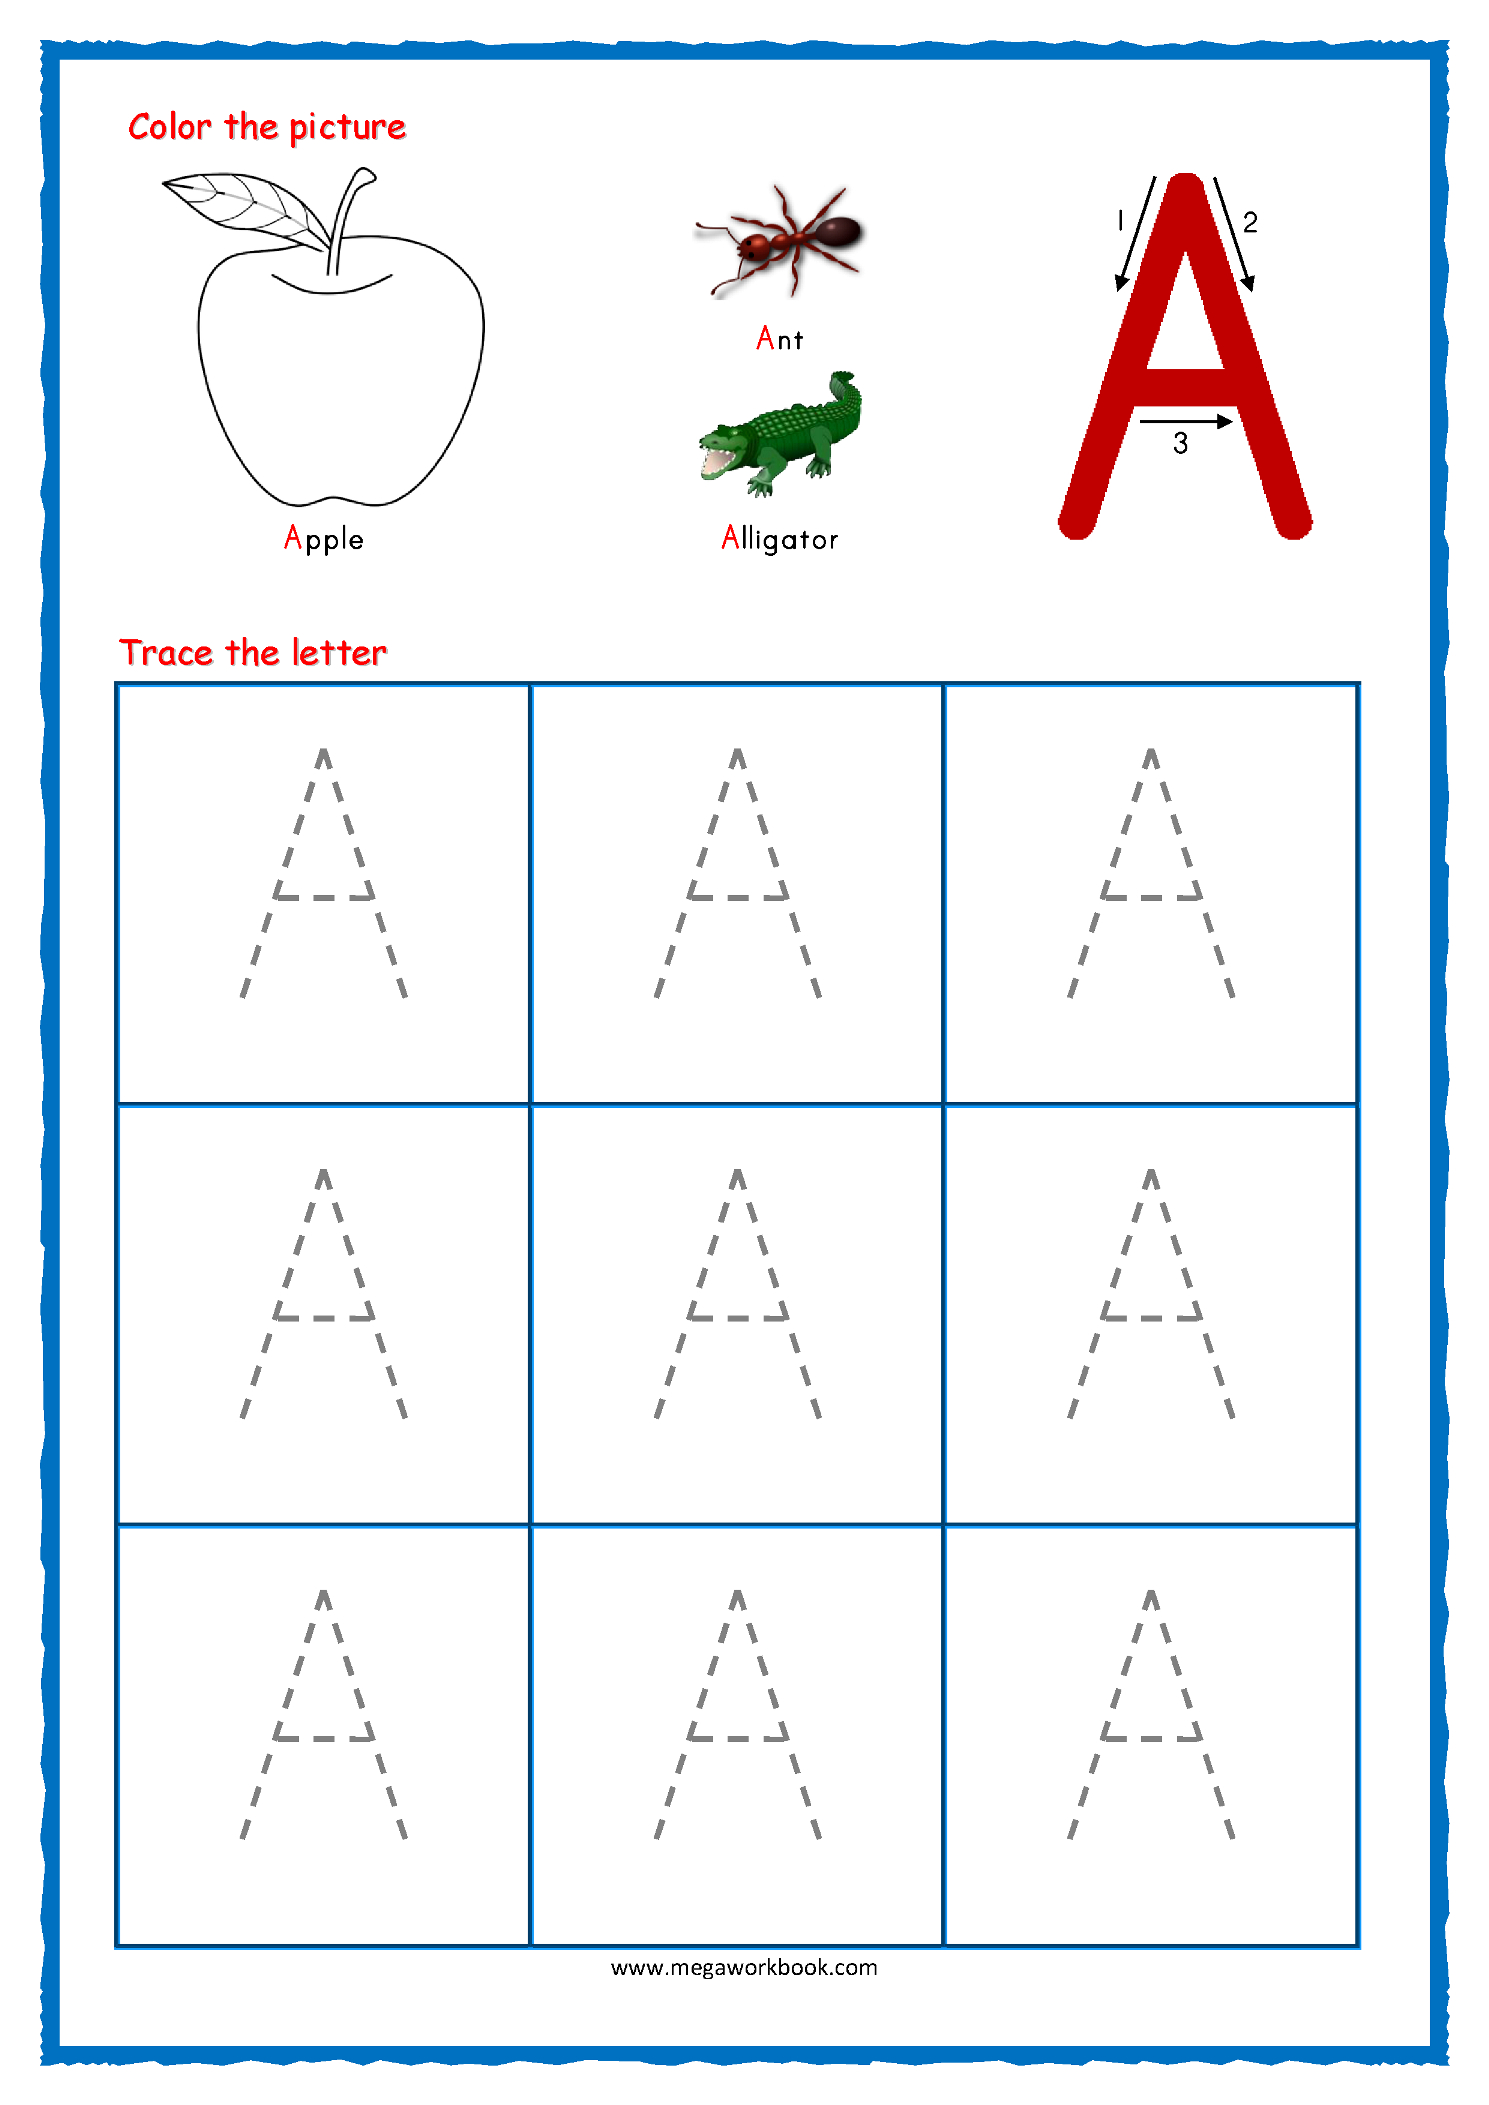 downloadable-tracing-letters-tracinglettersworksheetscom-traceable